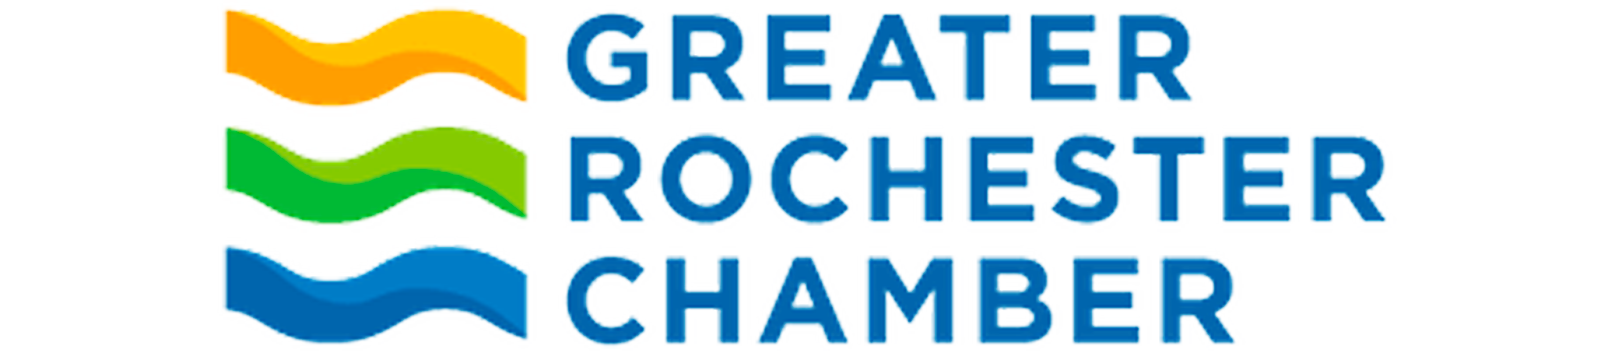 Greater Rochester Chamber